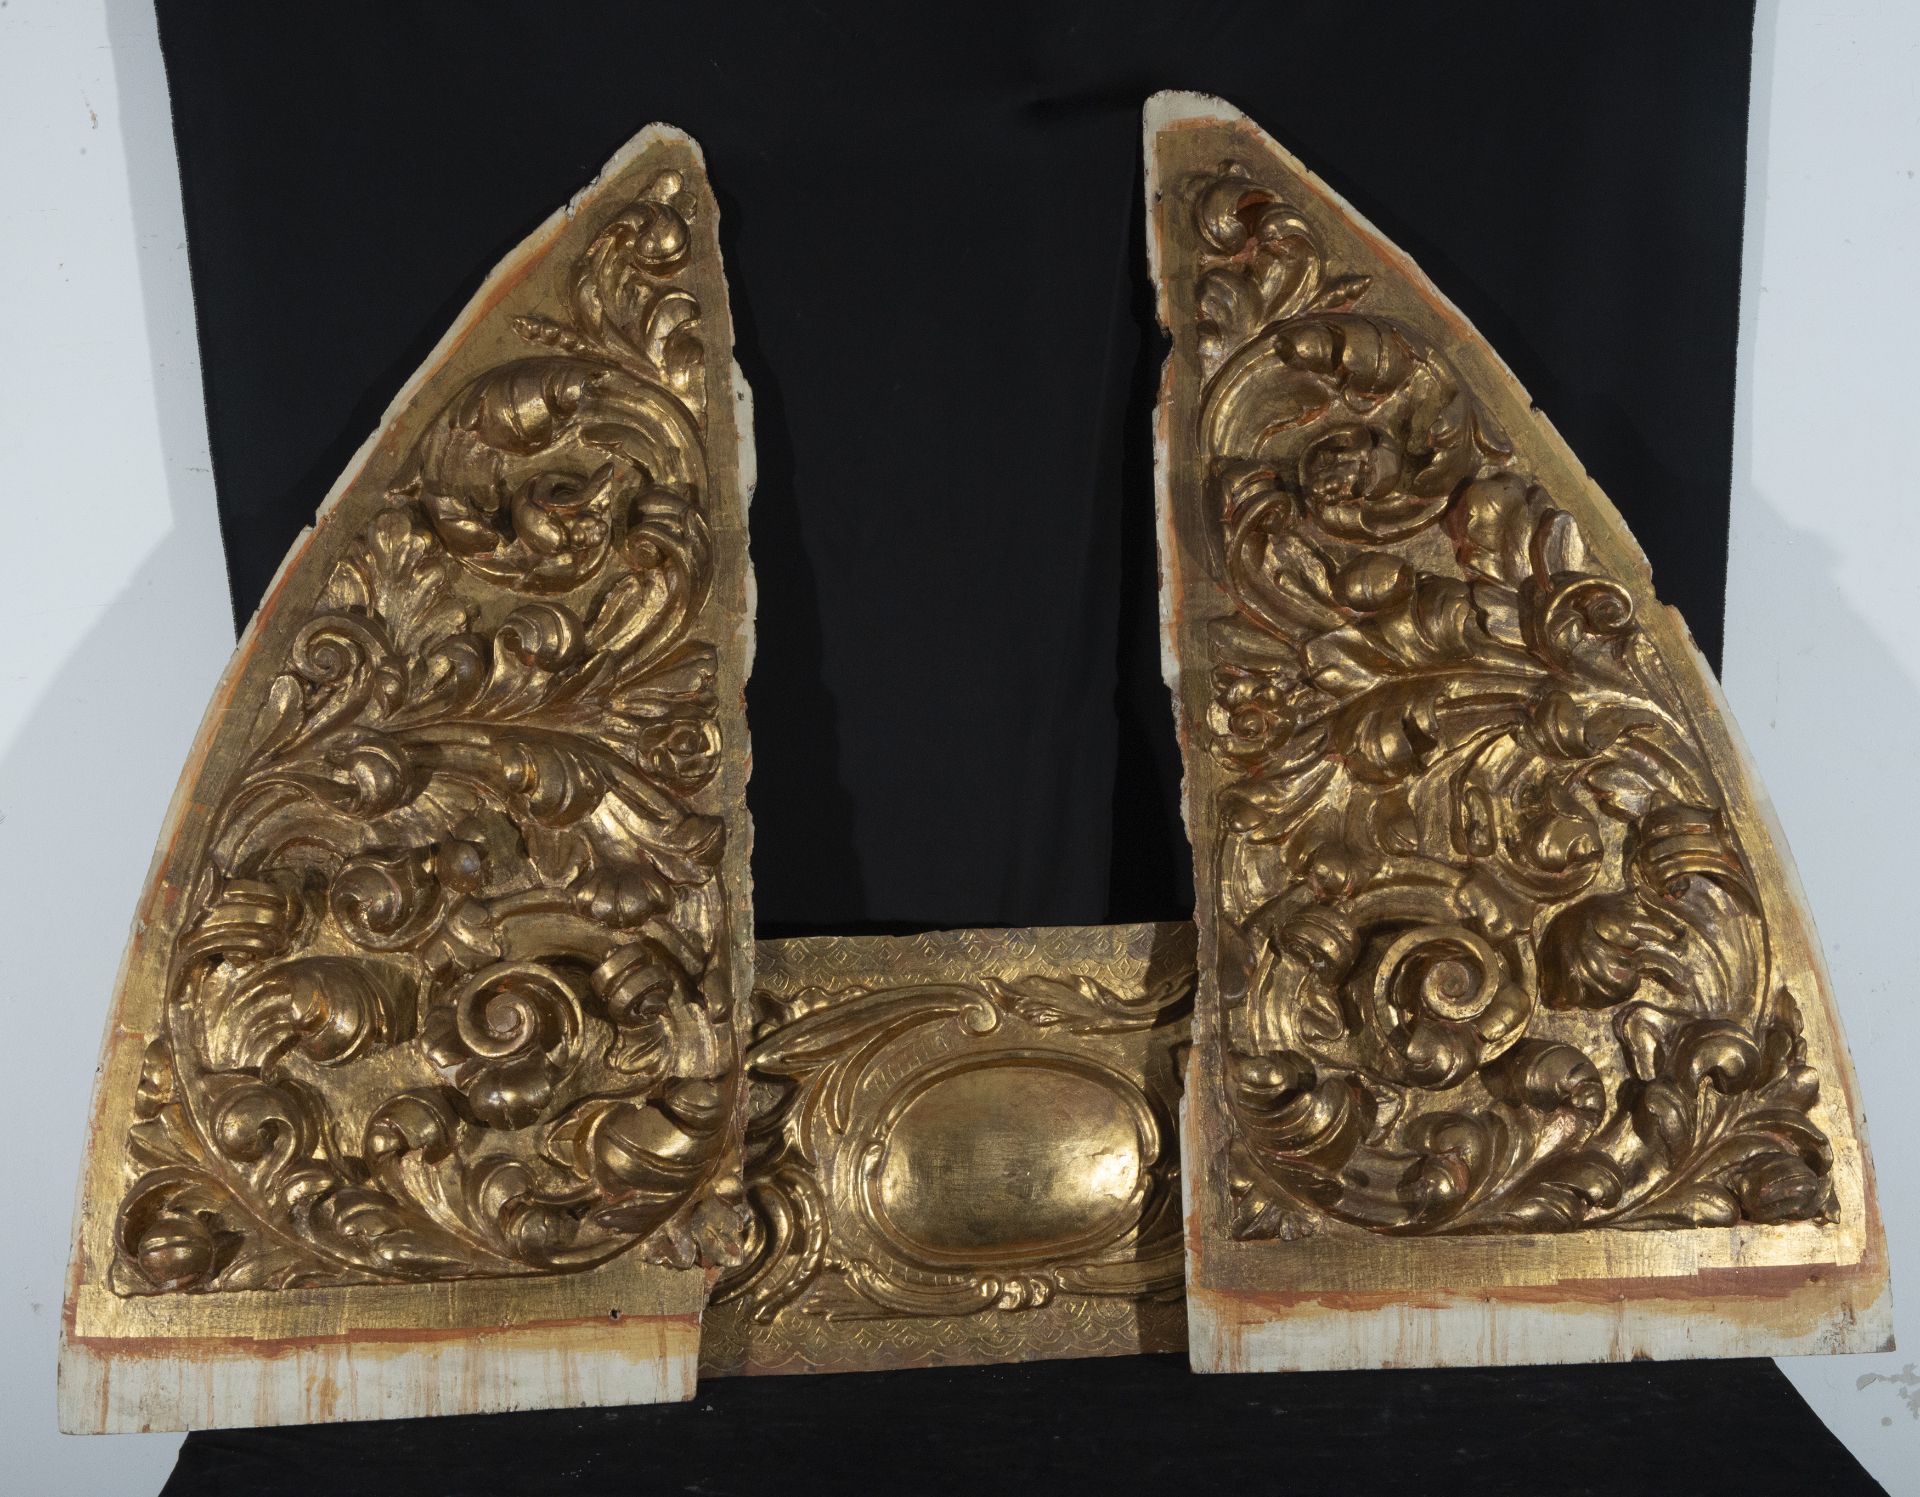 Lot of three Portuguese Baroque ceiling fragments, 17th century